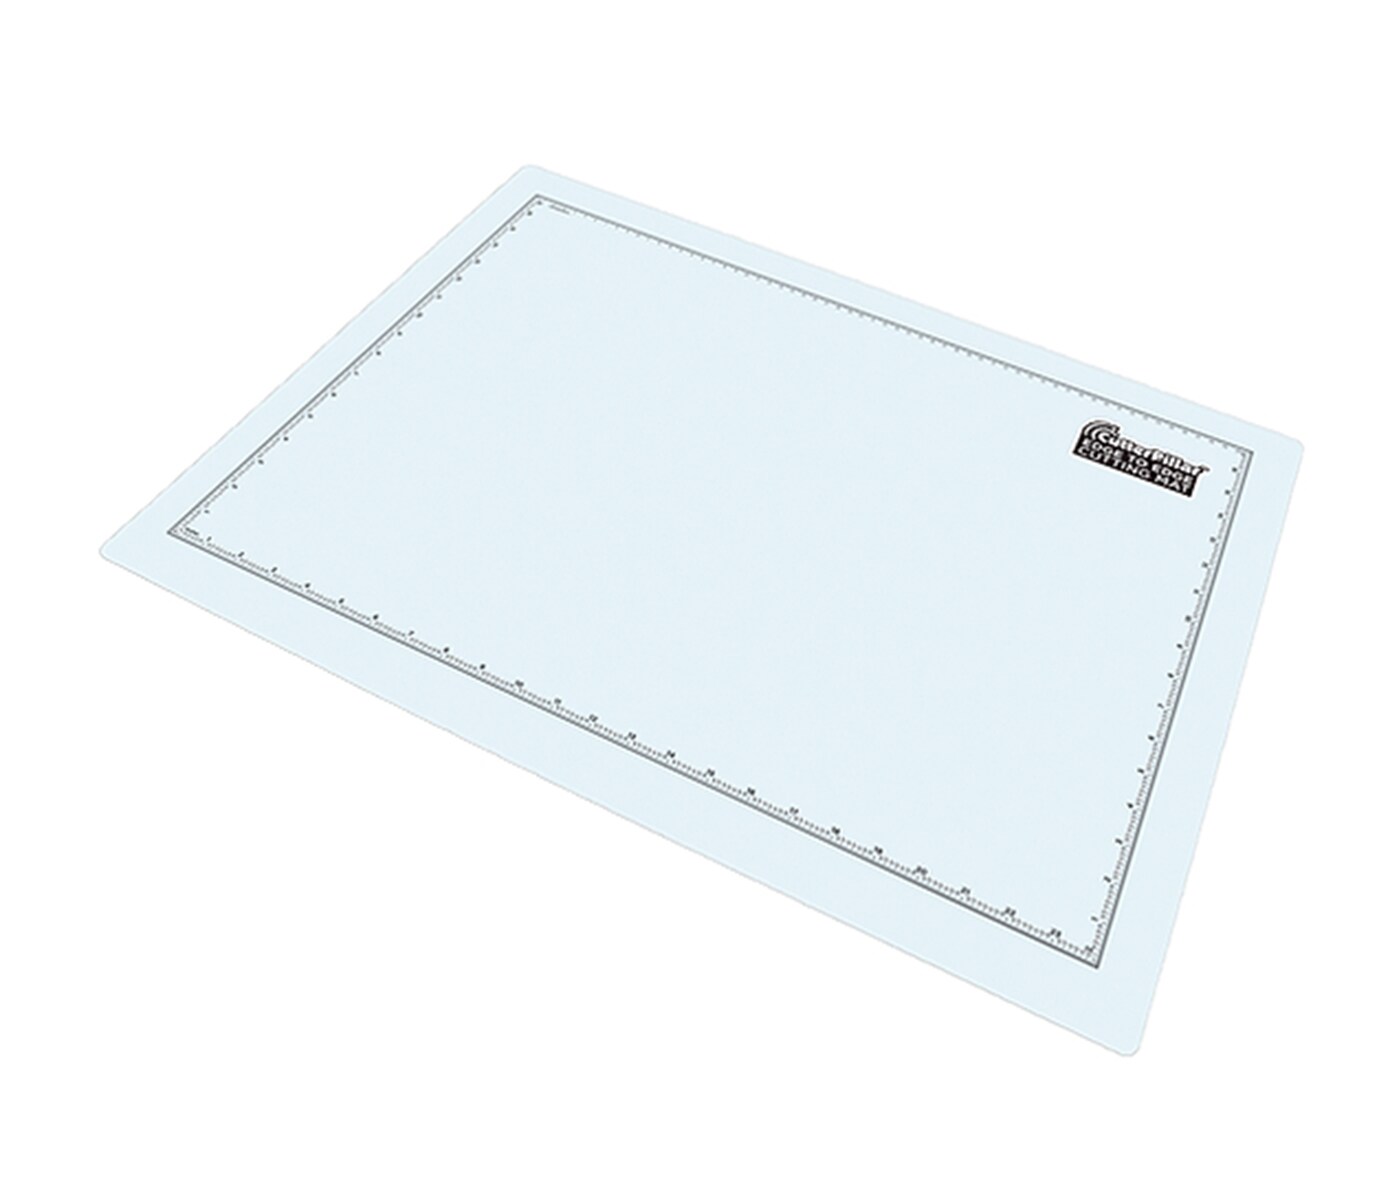 Designed as a add-on Mat for Glow Ultra Light-board, Blank, Grid-less Cutting Mat